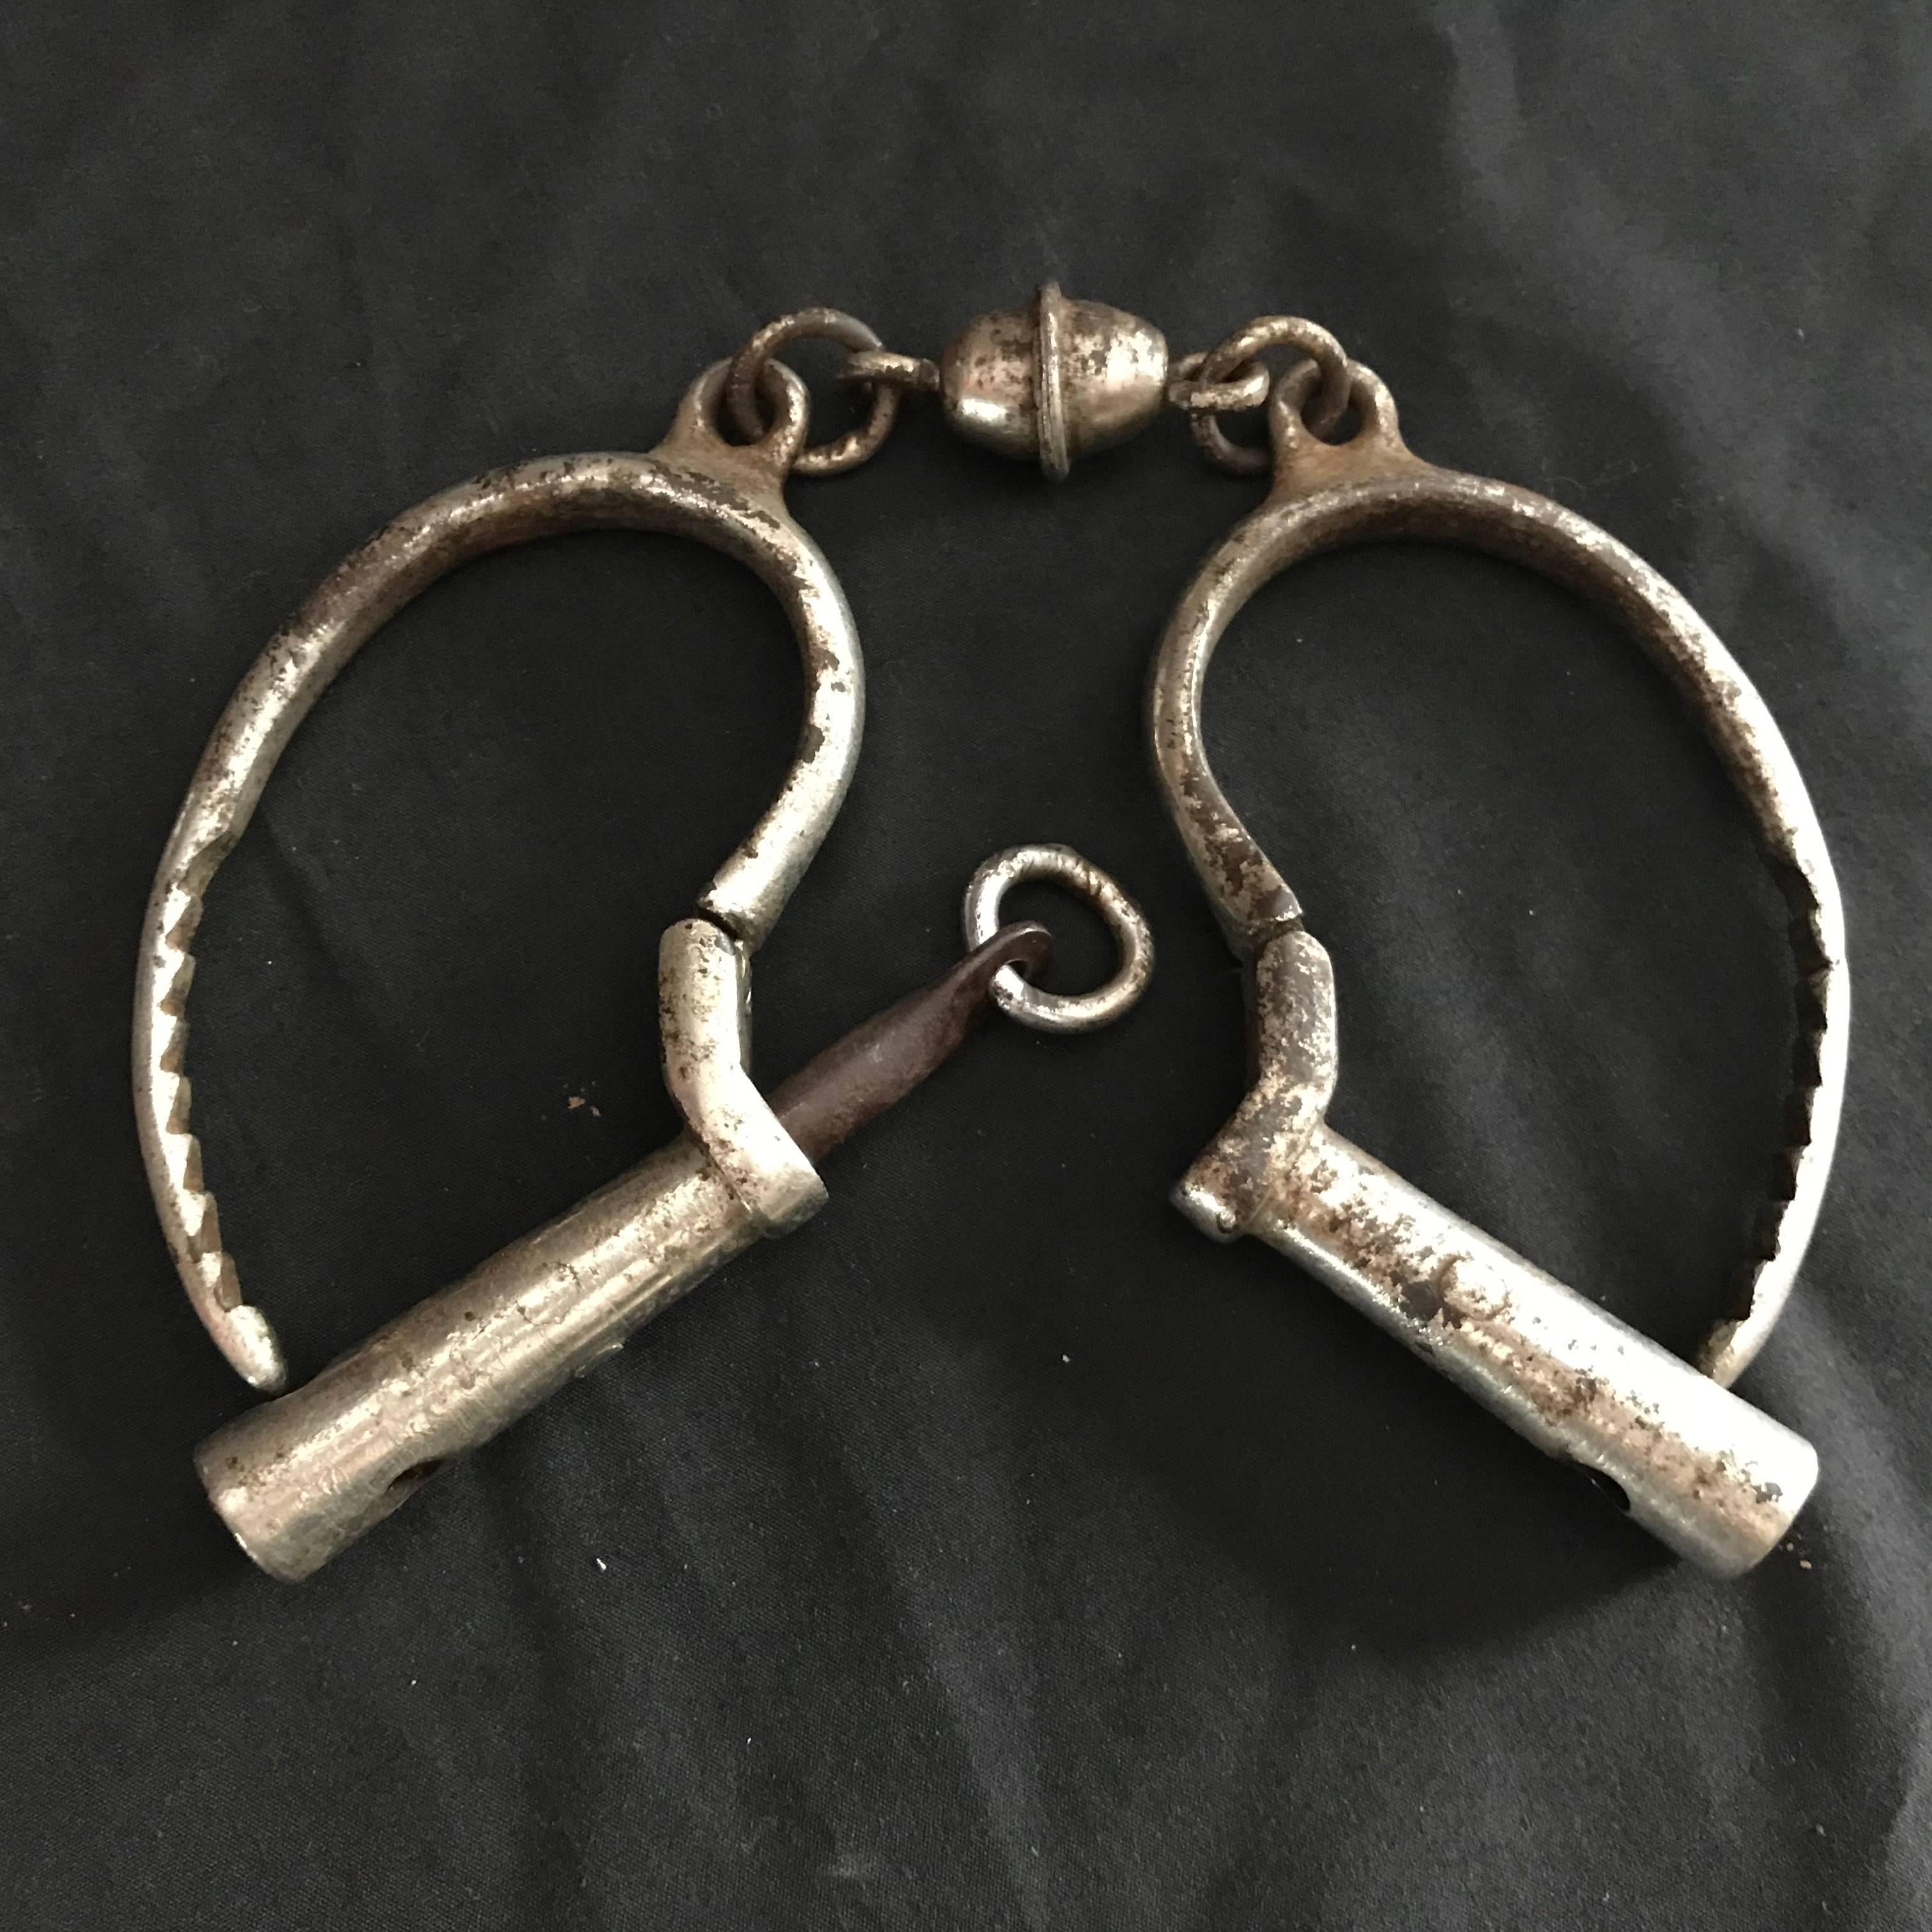 A hard to find Japanese antique pair of silver plated iron Samurai handcuffs dating to the 19th century, Meiji period. 

An unusual find.

This is a very fine Samurai pair complete with iron key.

Old patina and use appropriate to its great